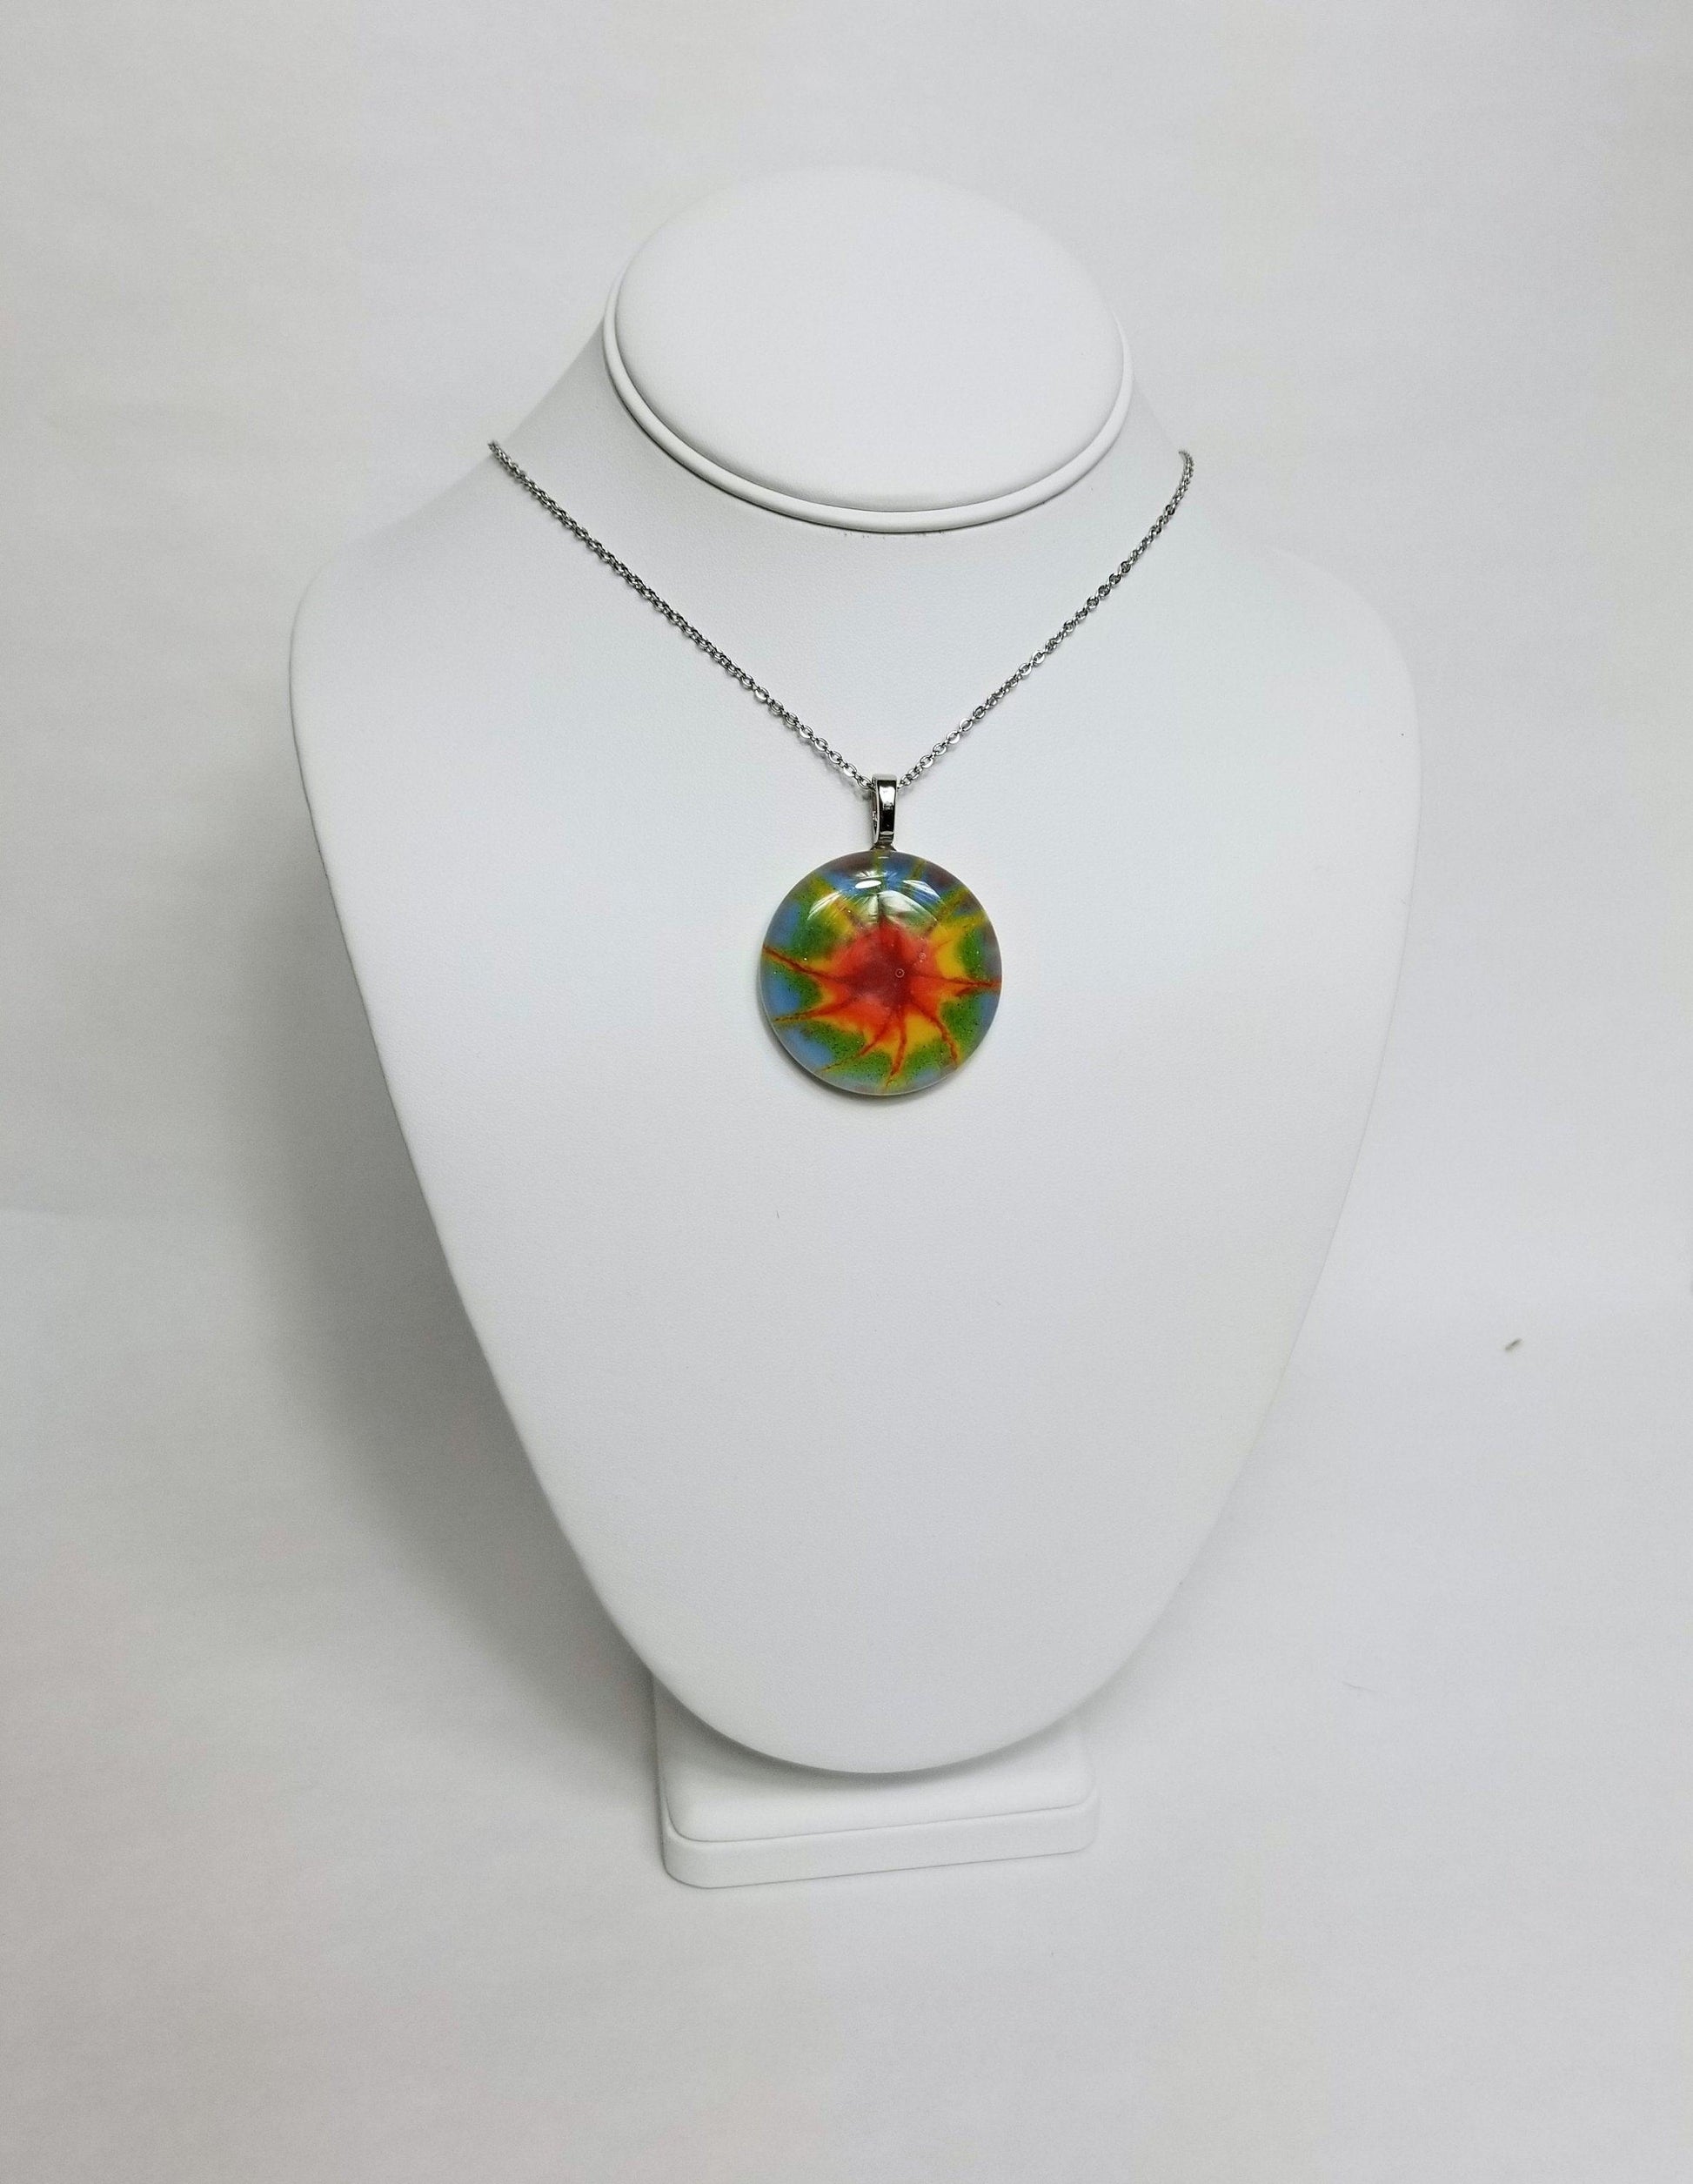 Tie Dye look fused glass Circle necklace, rainbow color from seeds glassworks seedsglassworks